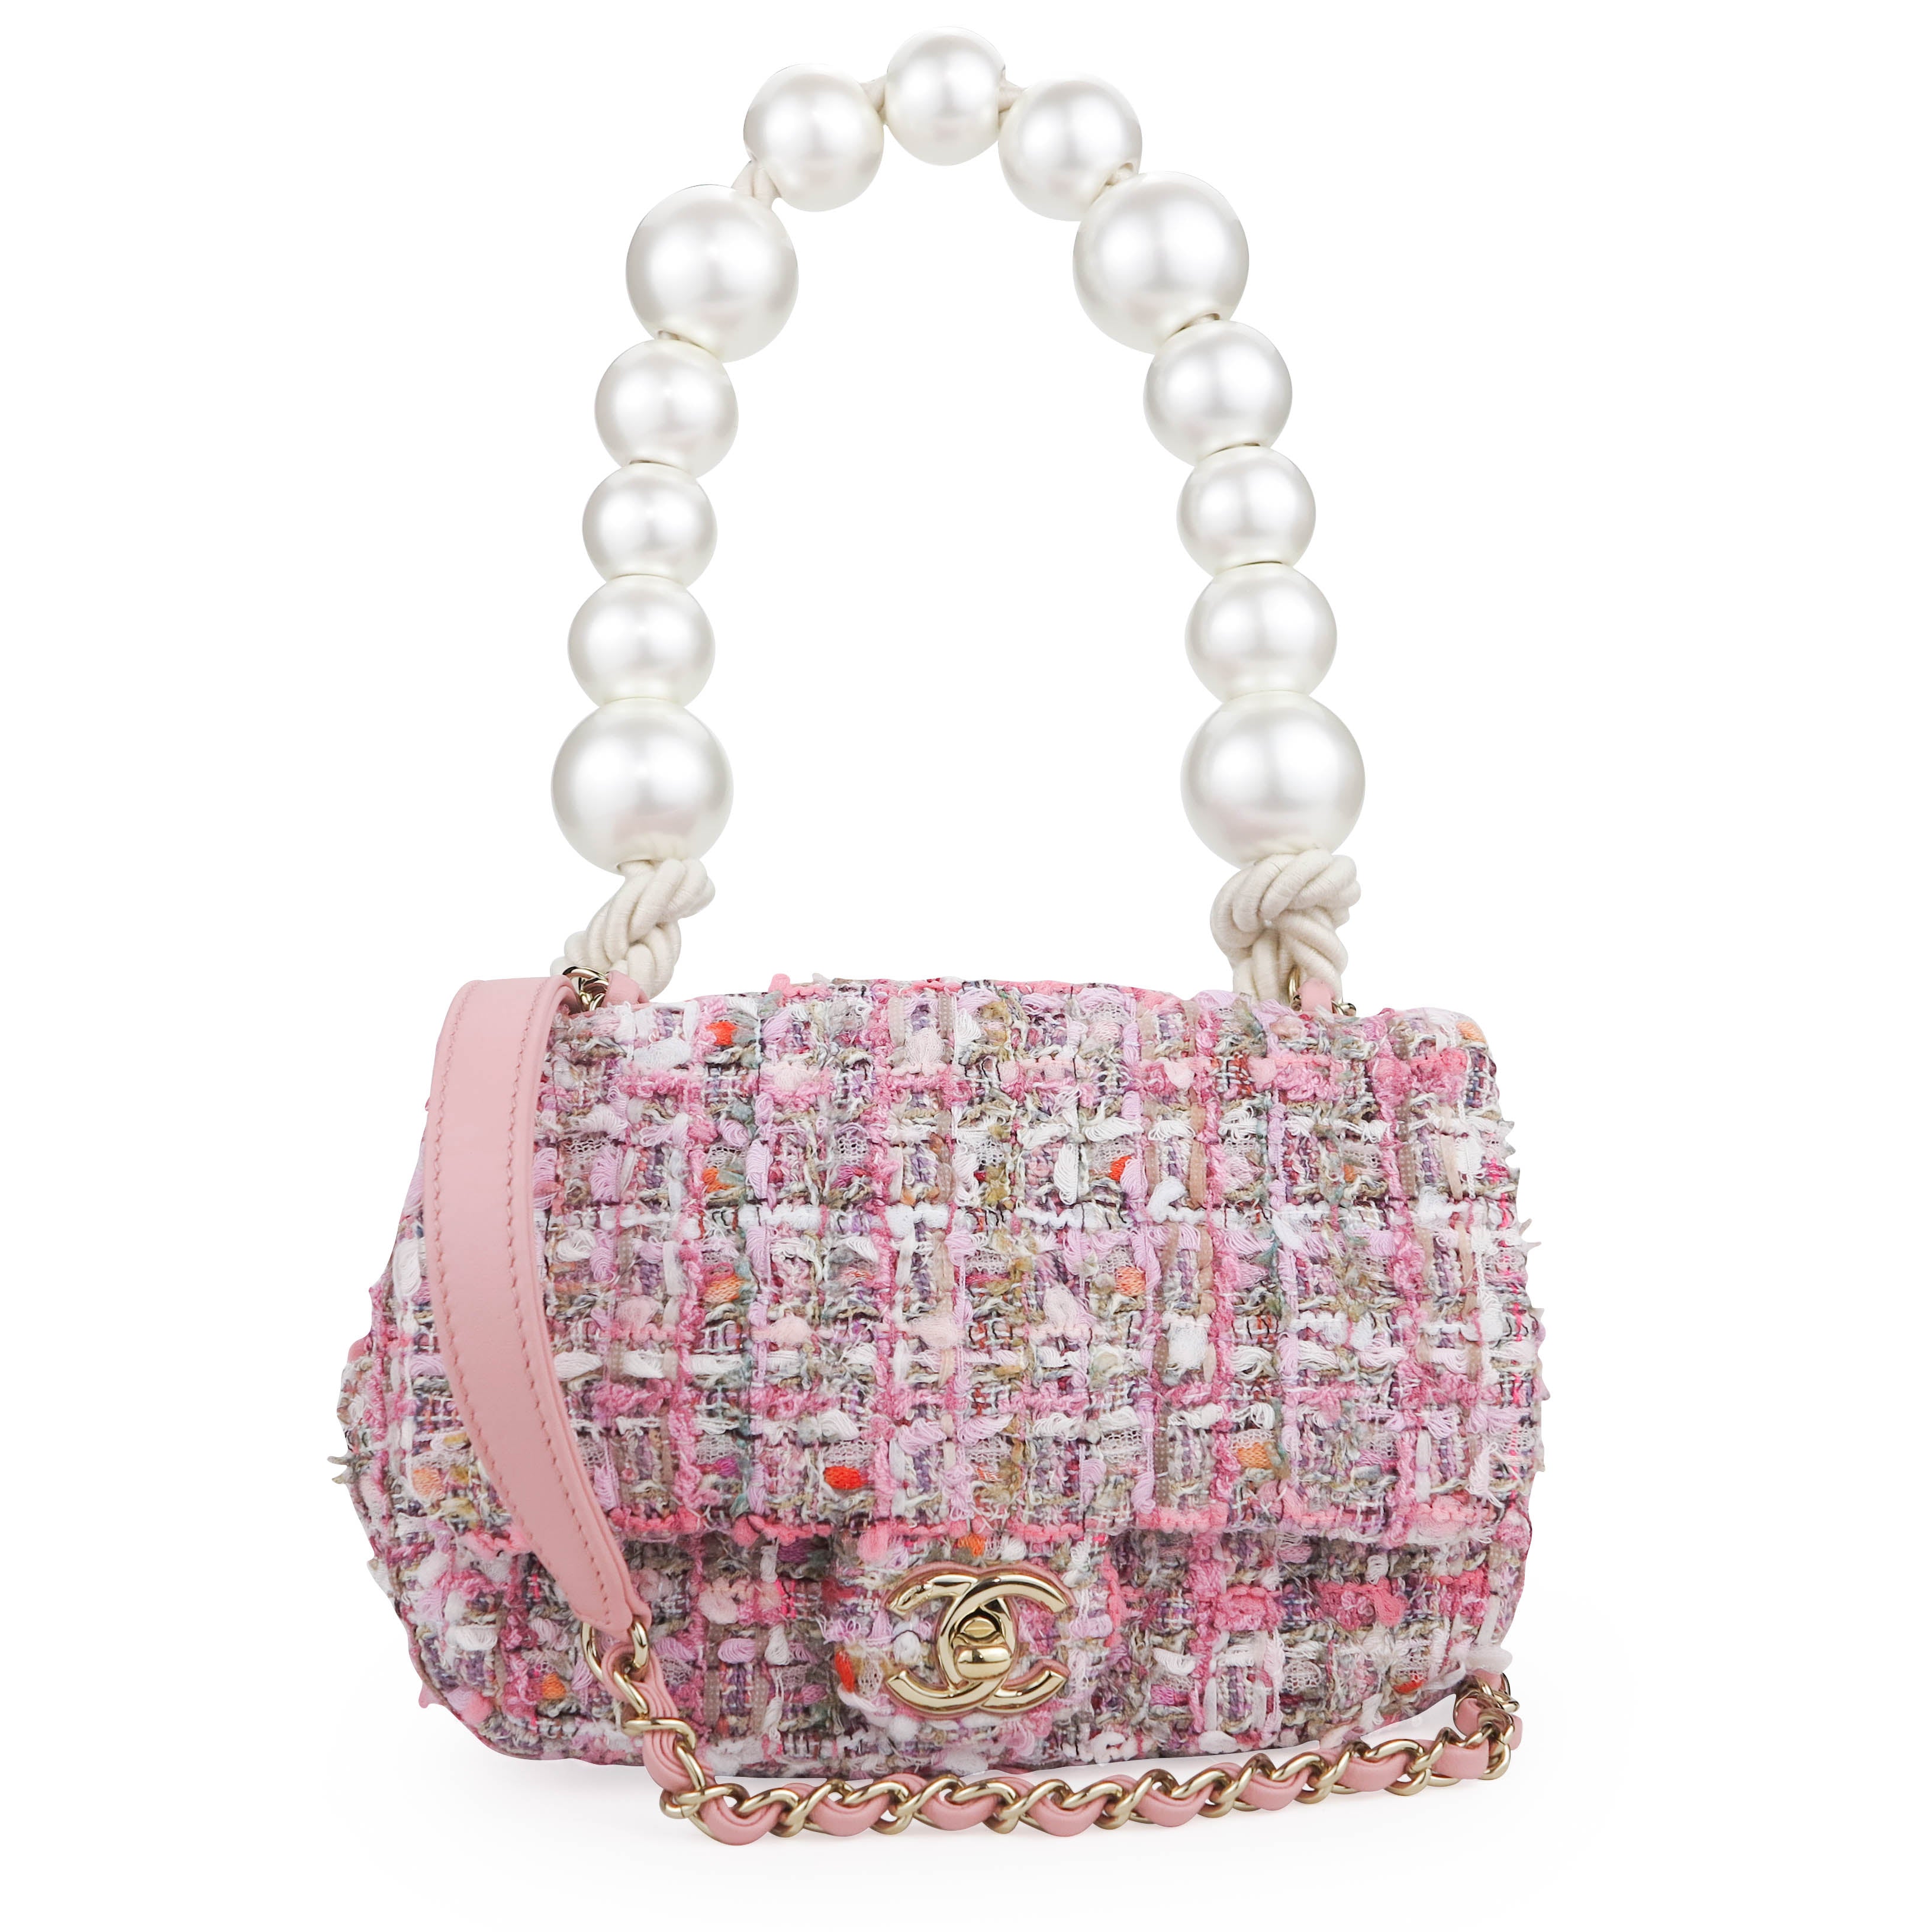 A PINK TWEED & PEARL HANDLE MINI FLAP BAG WITH GOLD HARDWARE, CHANEL,  SPRING/SUMMER 2019